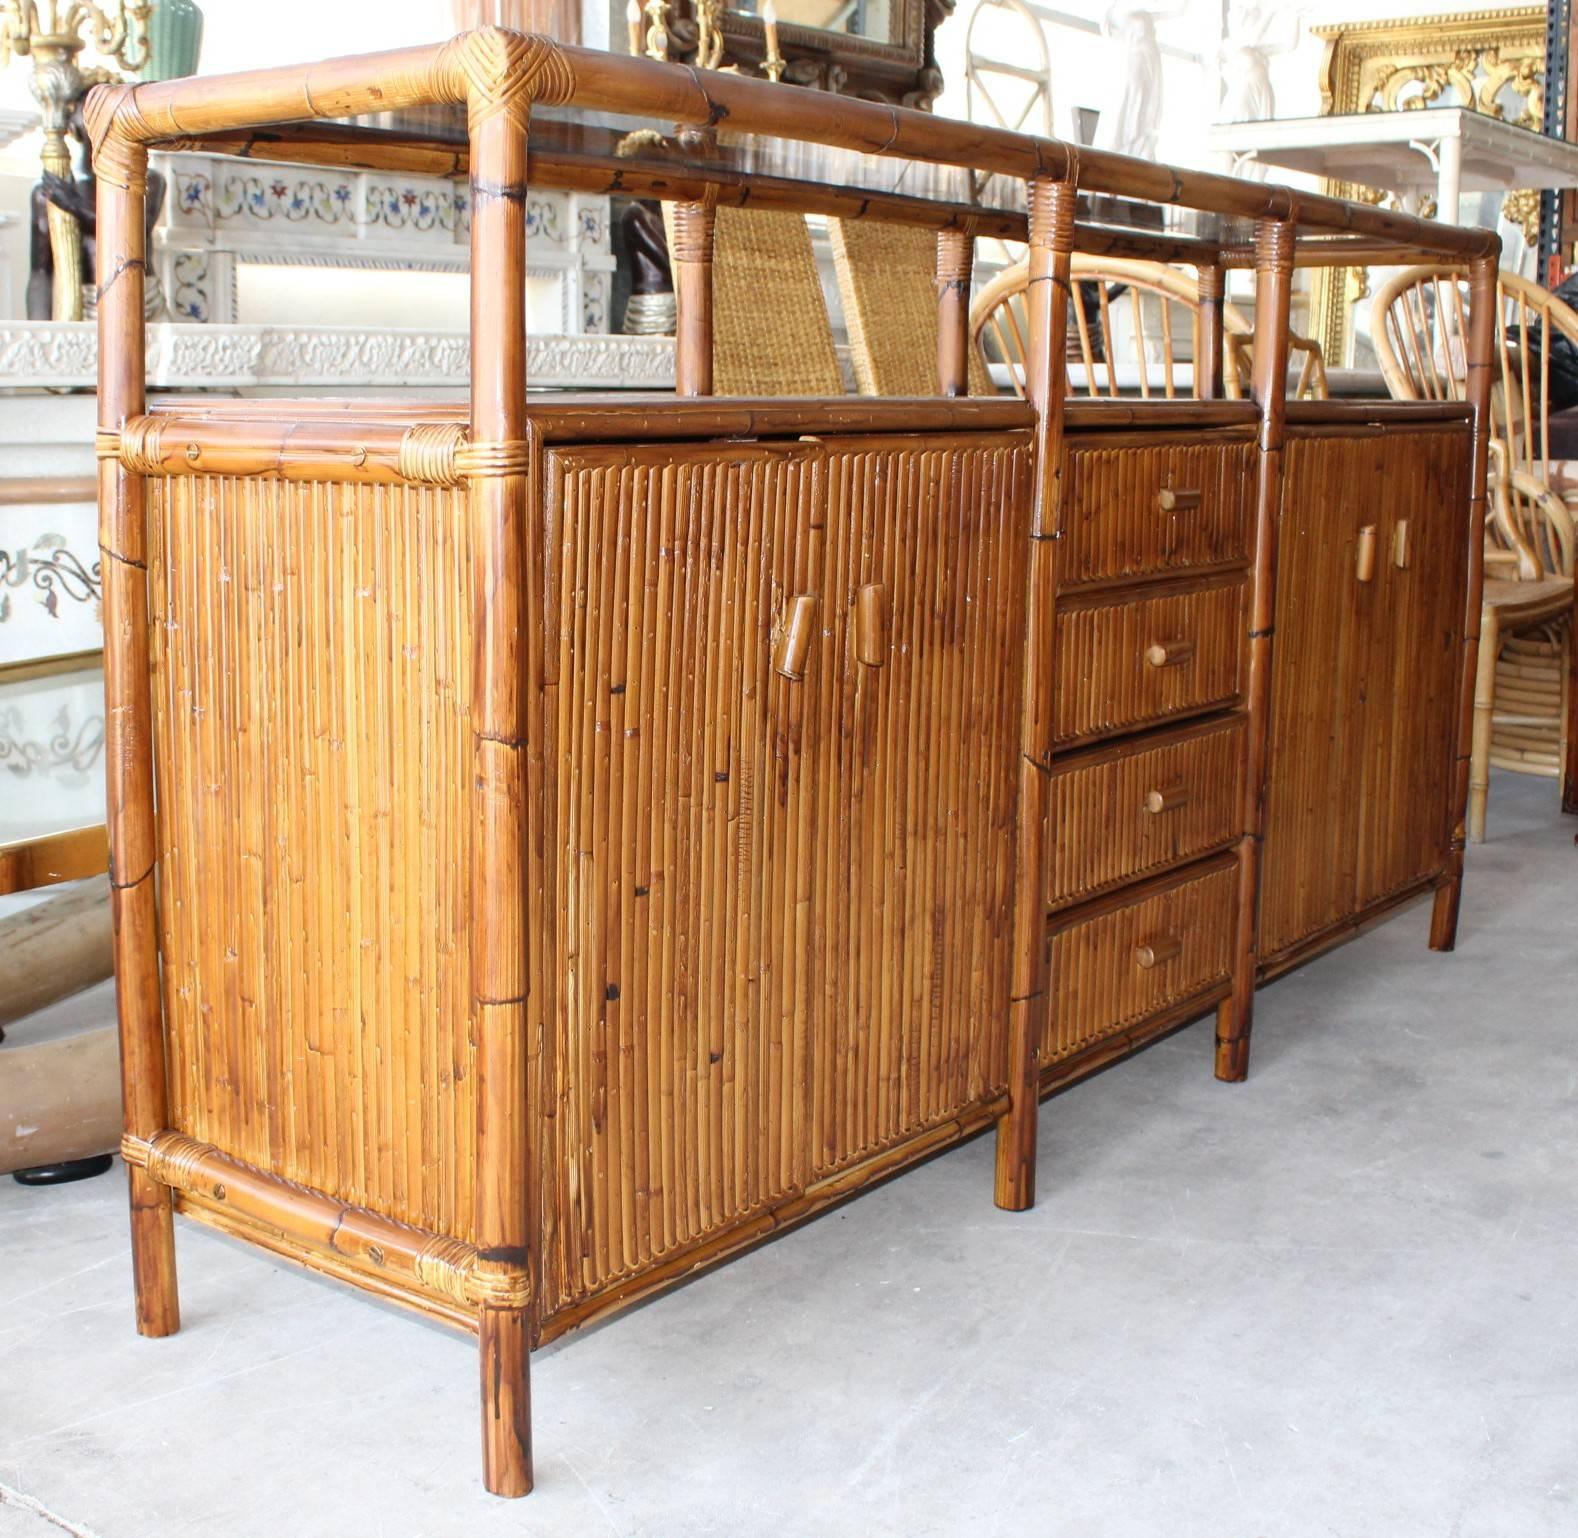 1990s bamboo Spanish sideboard with glass top. Four drawers in the centre and two doors on either side.